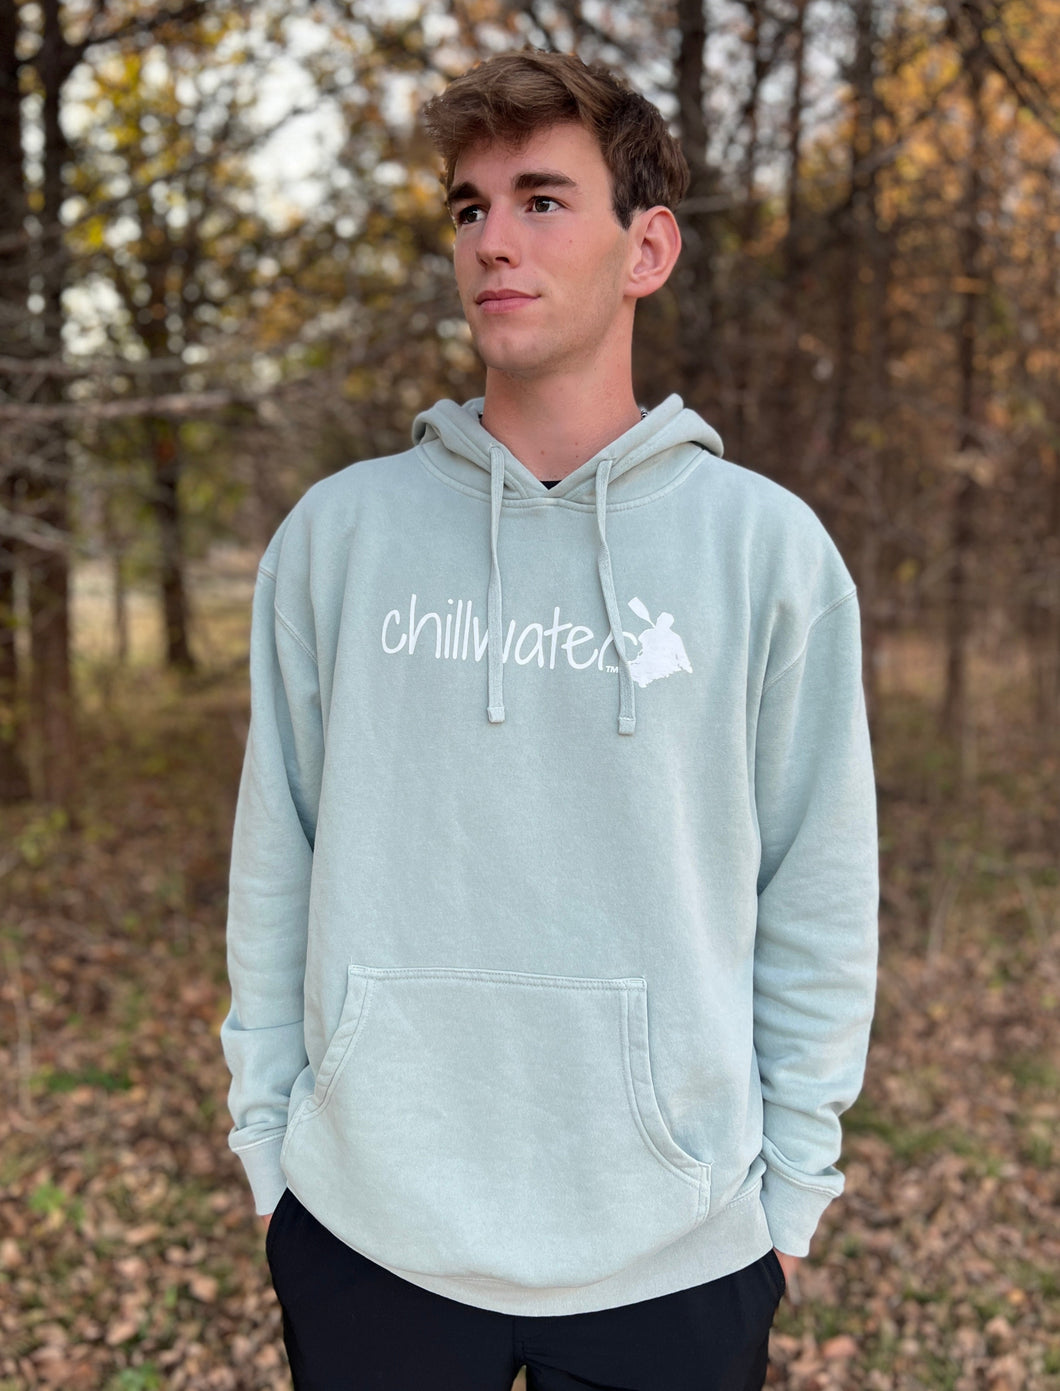 Young male wearing a soft cypress green sweatshirt hoodie with the Kayak design by Chillwater.